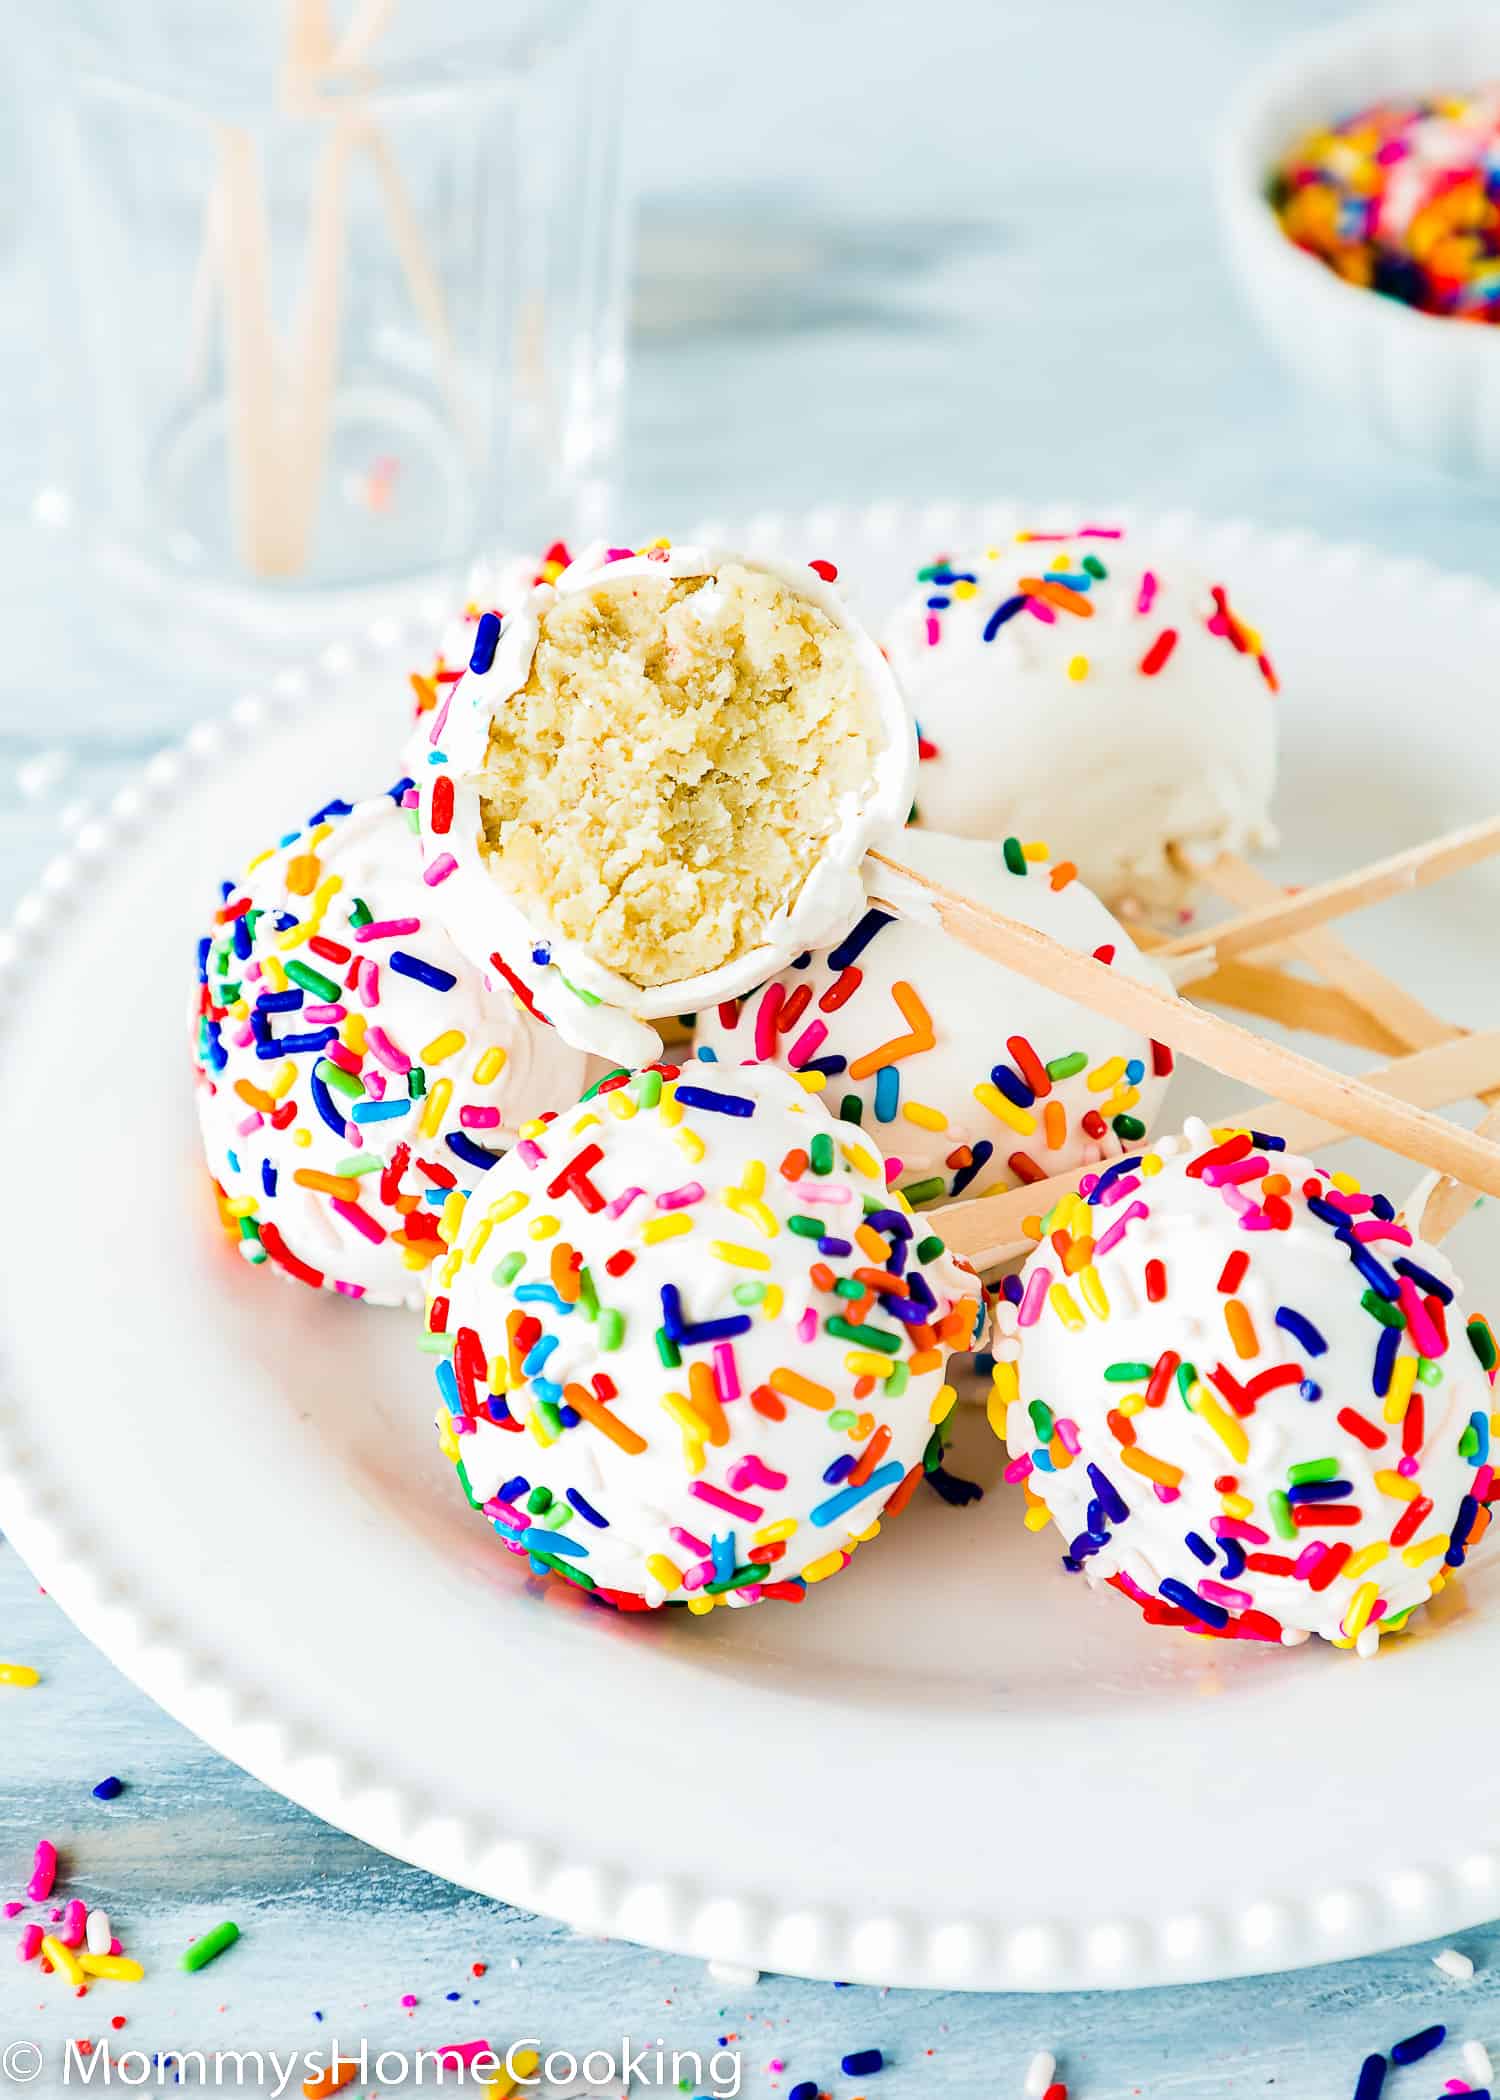 homemade egg-free cake pops on a plate with a bowl of sprinkles on the background.